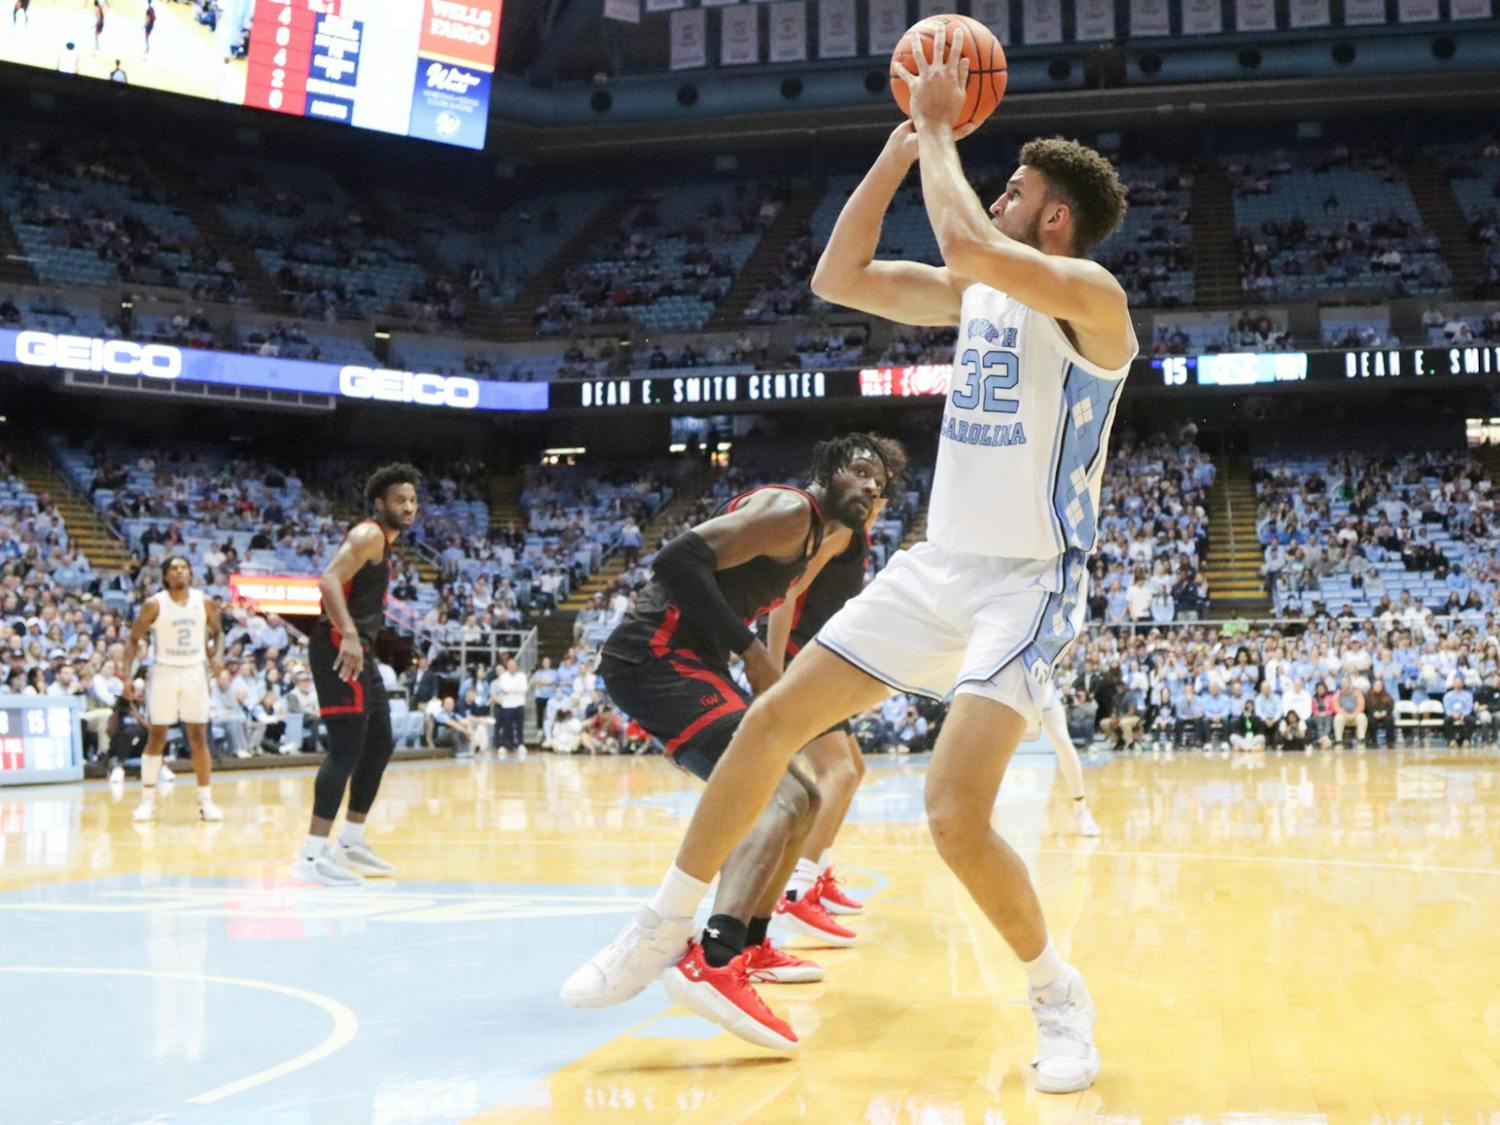 UNC graduate forward Pete Nance (32) shoots the ball during a home game against Gardner-Webb at the Dean Smith Center on Nov. 15, 2022.